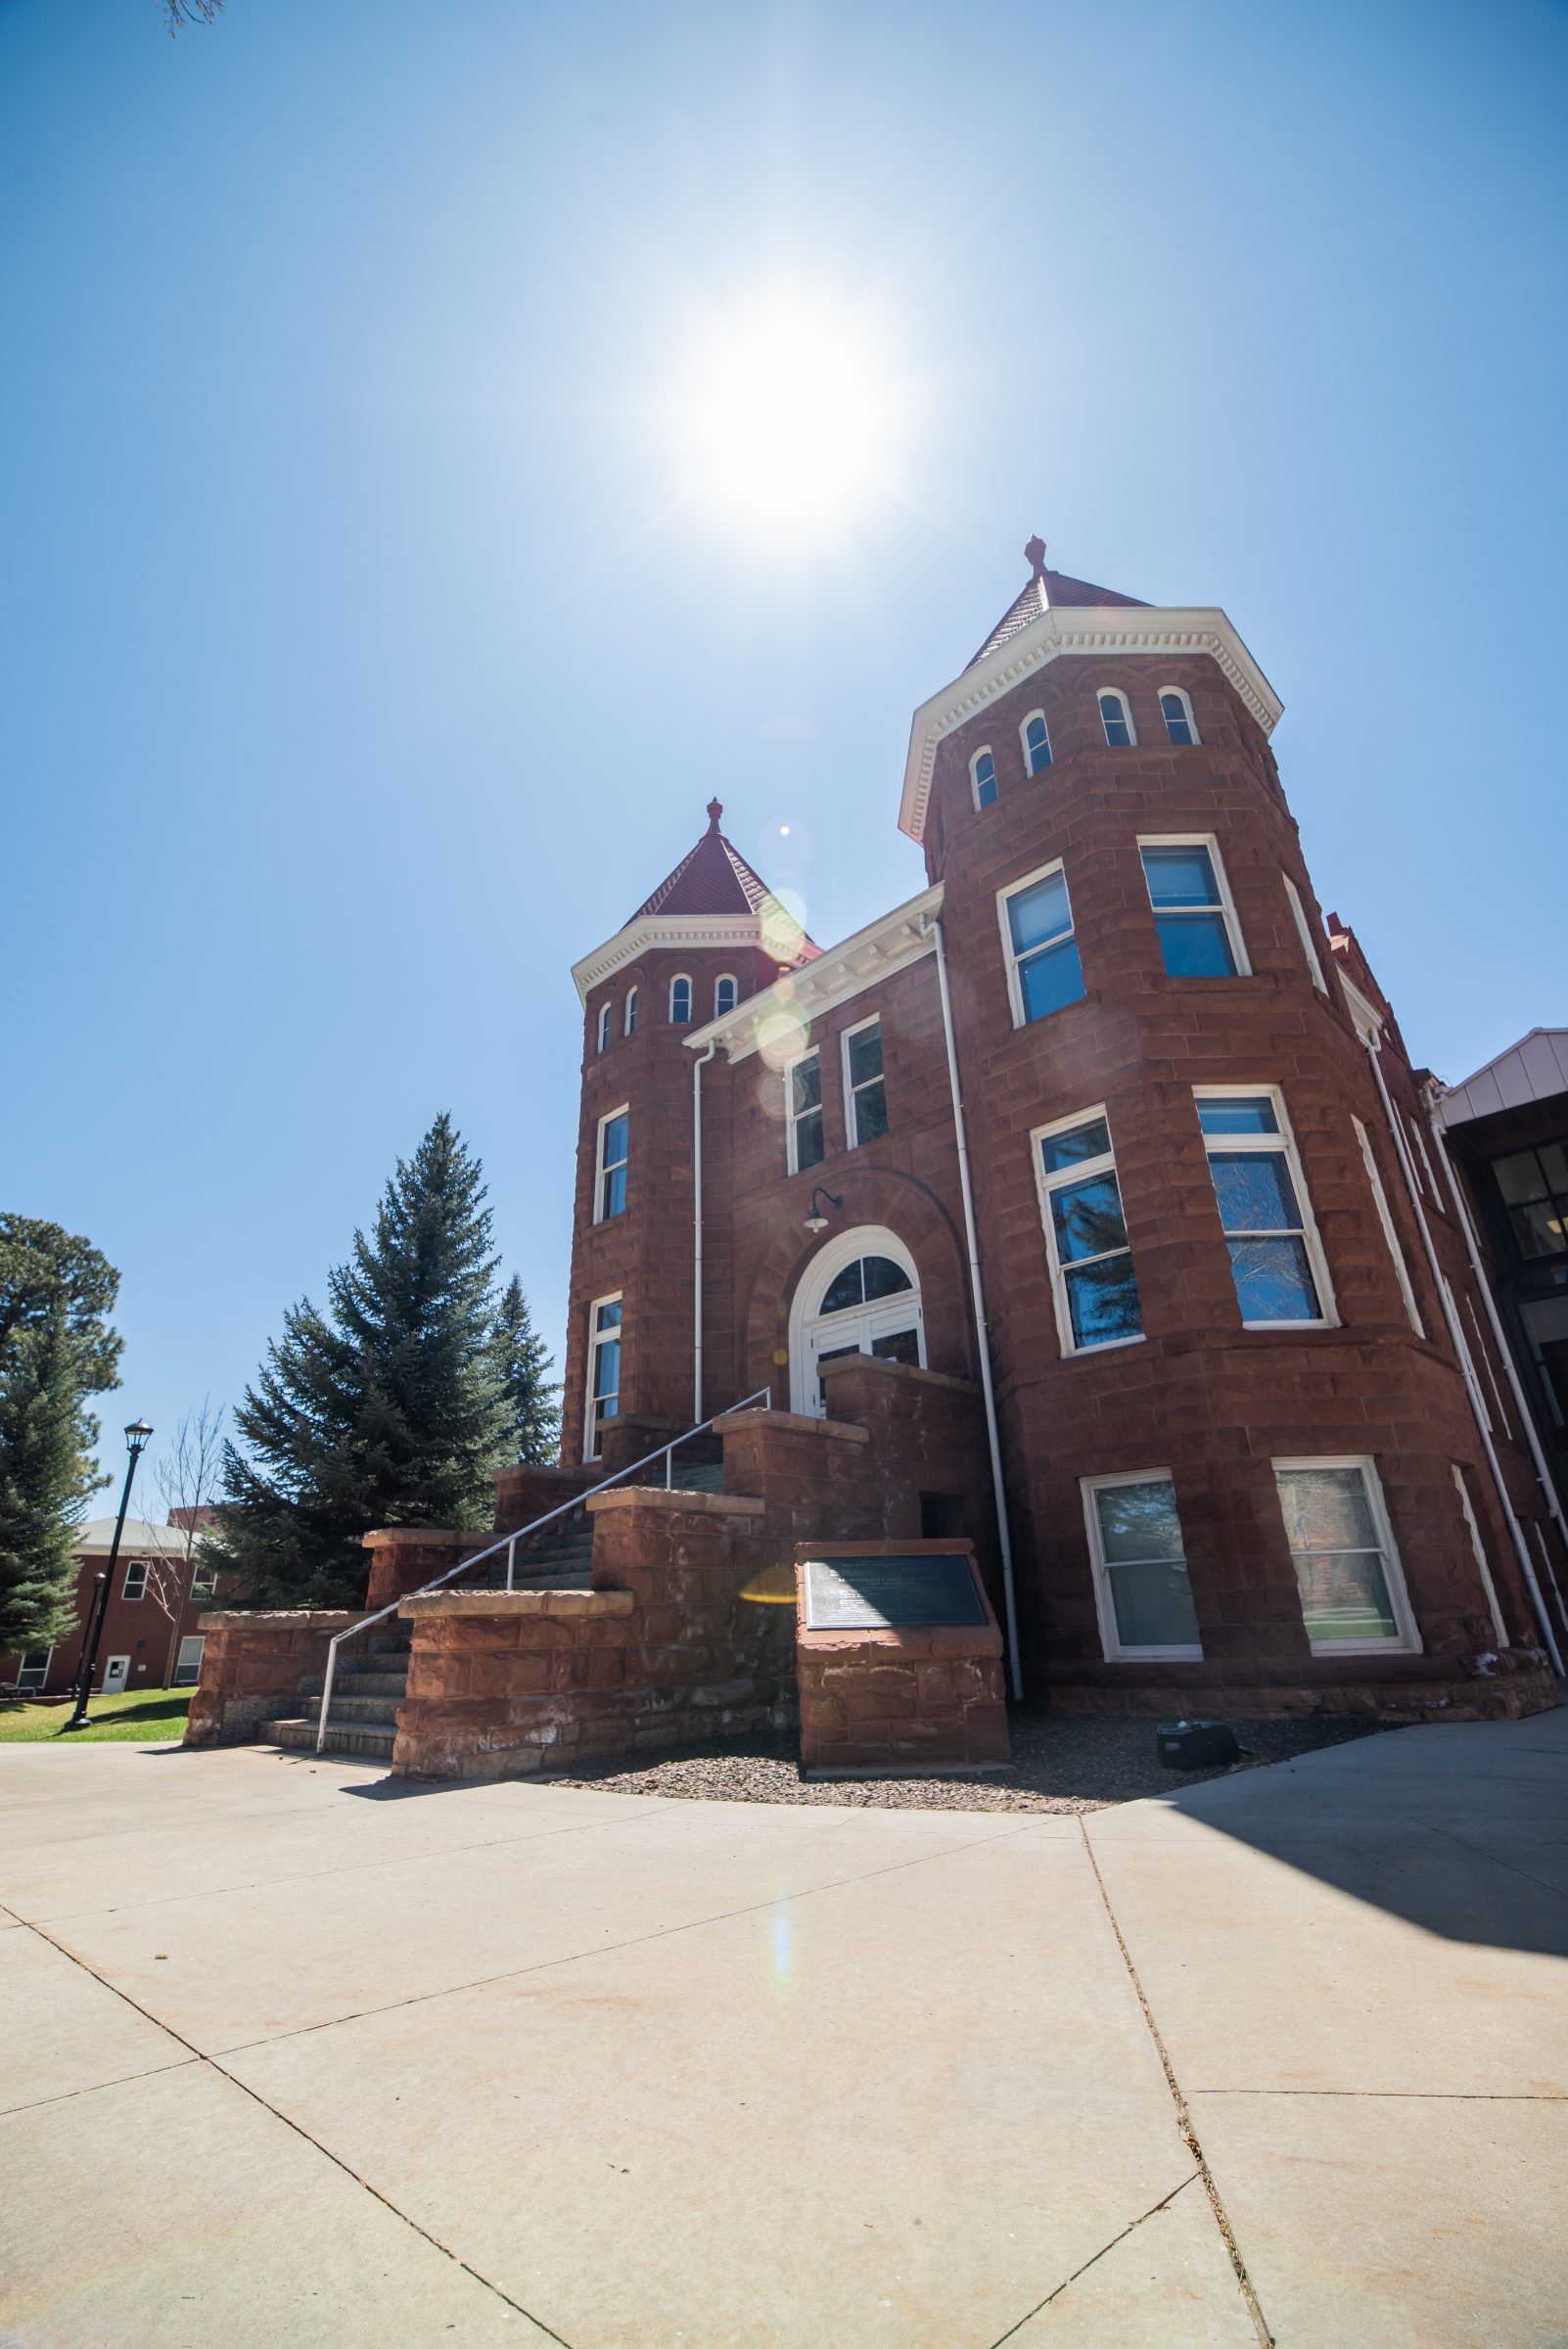 Old Main on the N A U Flagstaff mountain campus